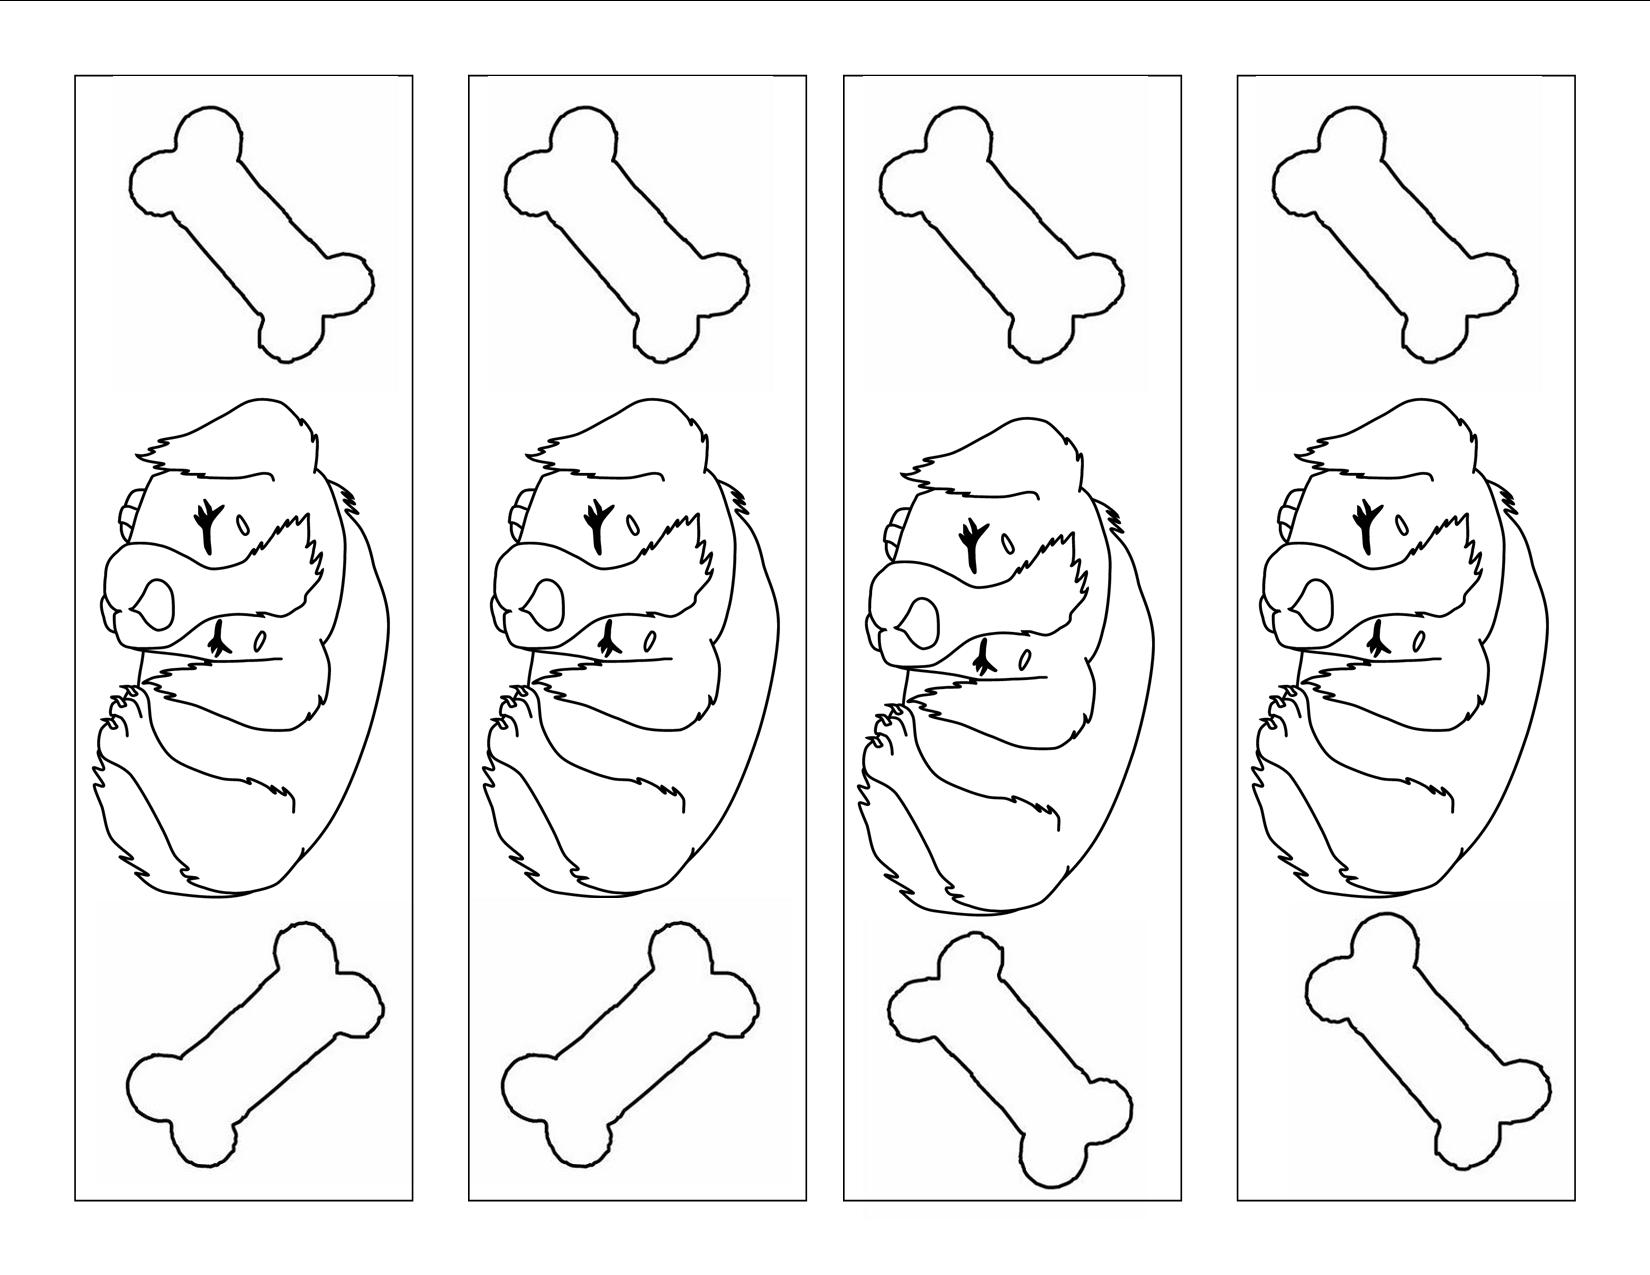 5 Best Images of Printable Puppy Bookmarks Cute Puppy Bookmarks Print